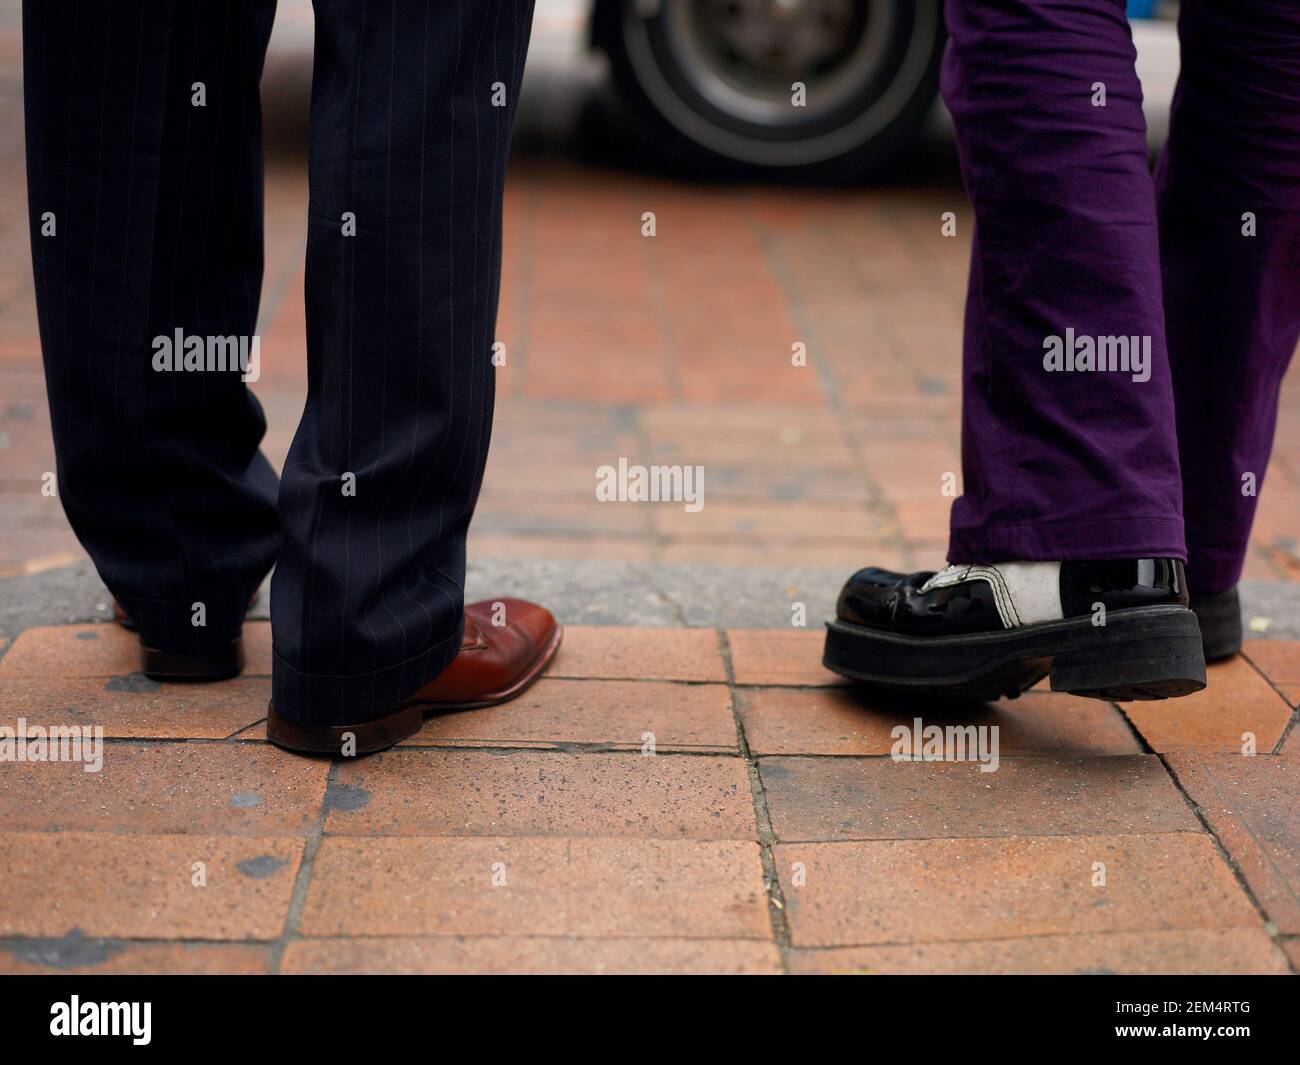 Low section view of two people walking on the street Stock Photo